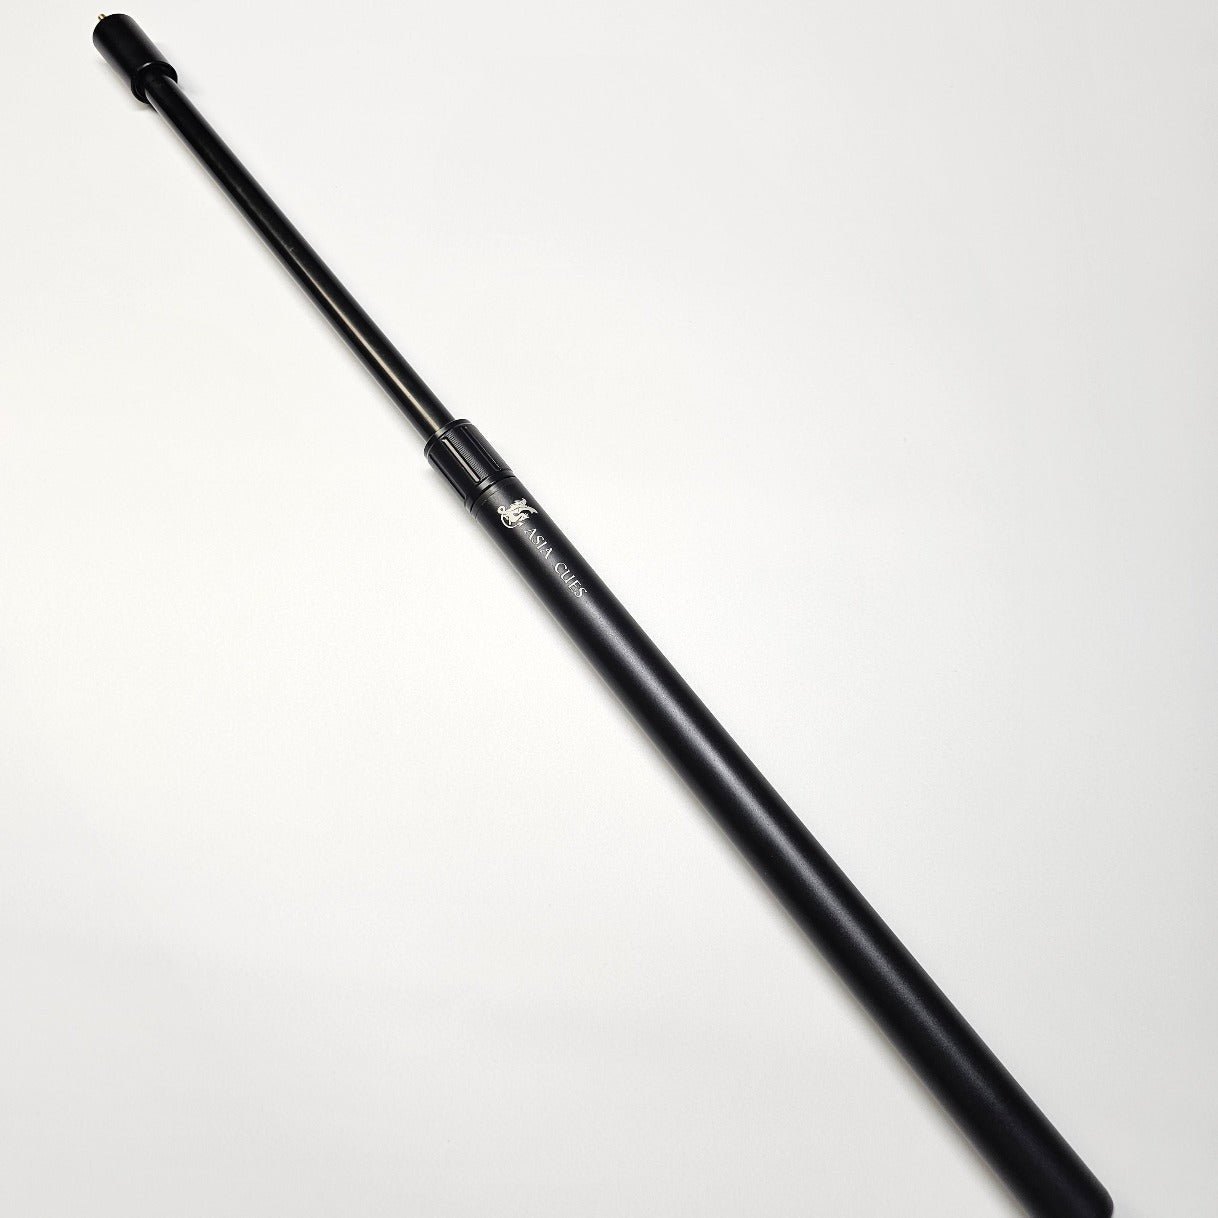 Asia Cues telescopic extension extended view